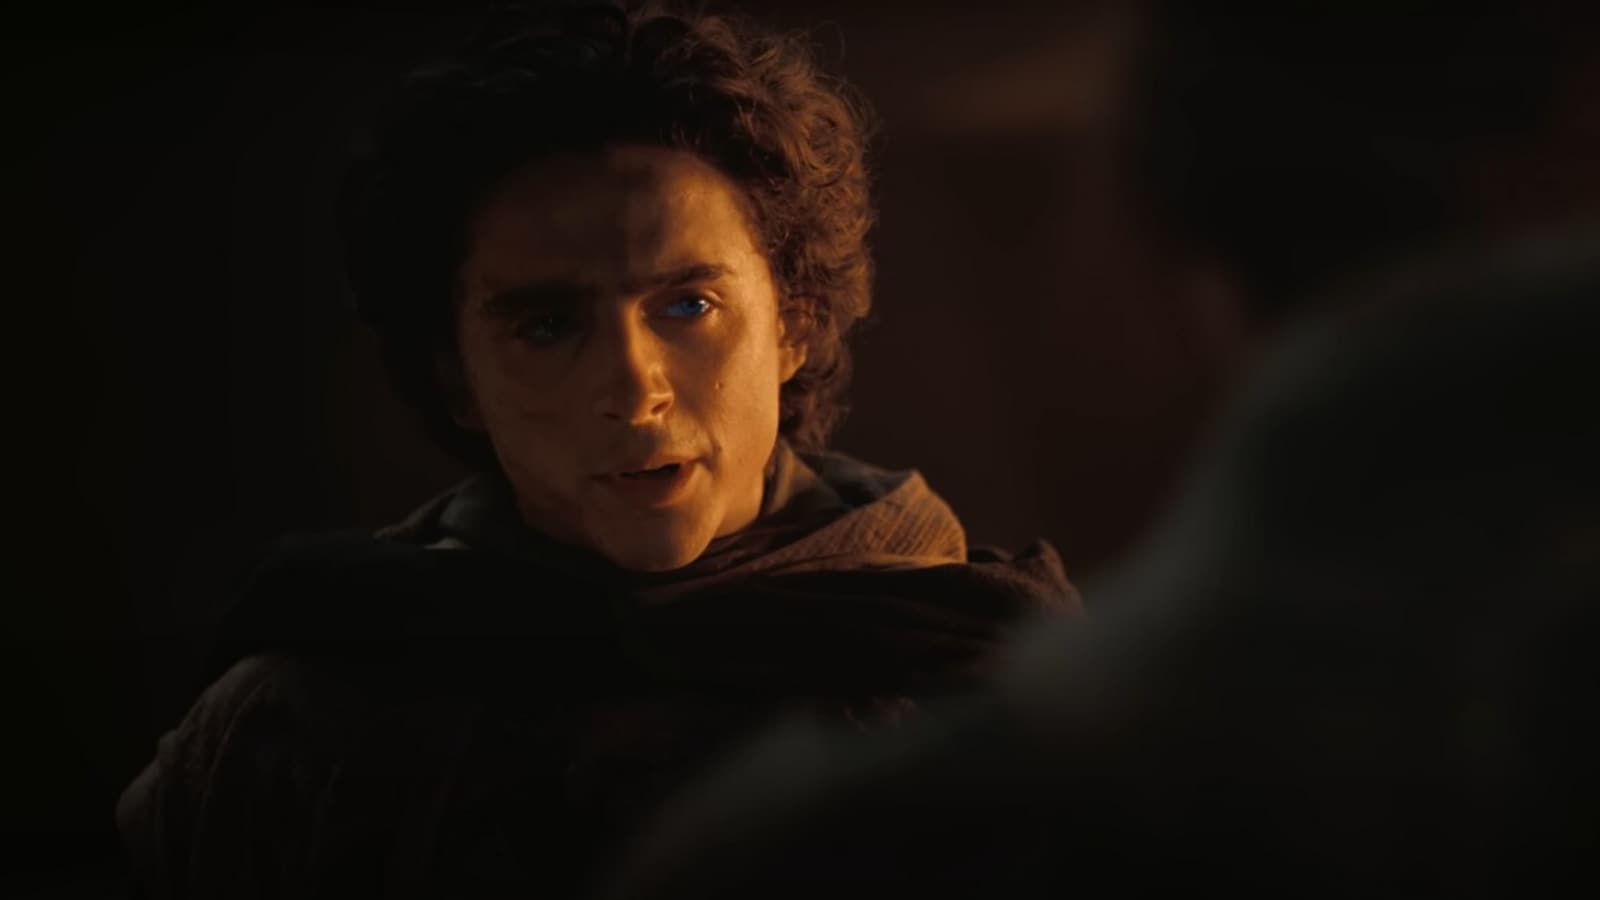 Dune Part Two box office collection day 5: Timothee Chalamet and Zendaya film earns over ₹14 crore in India